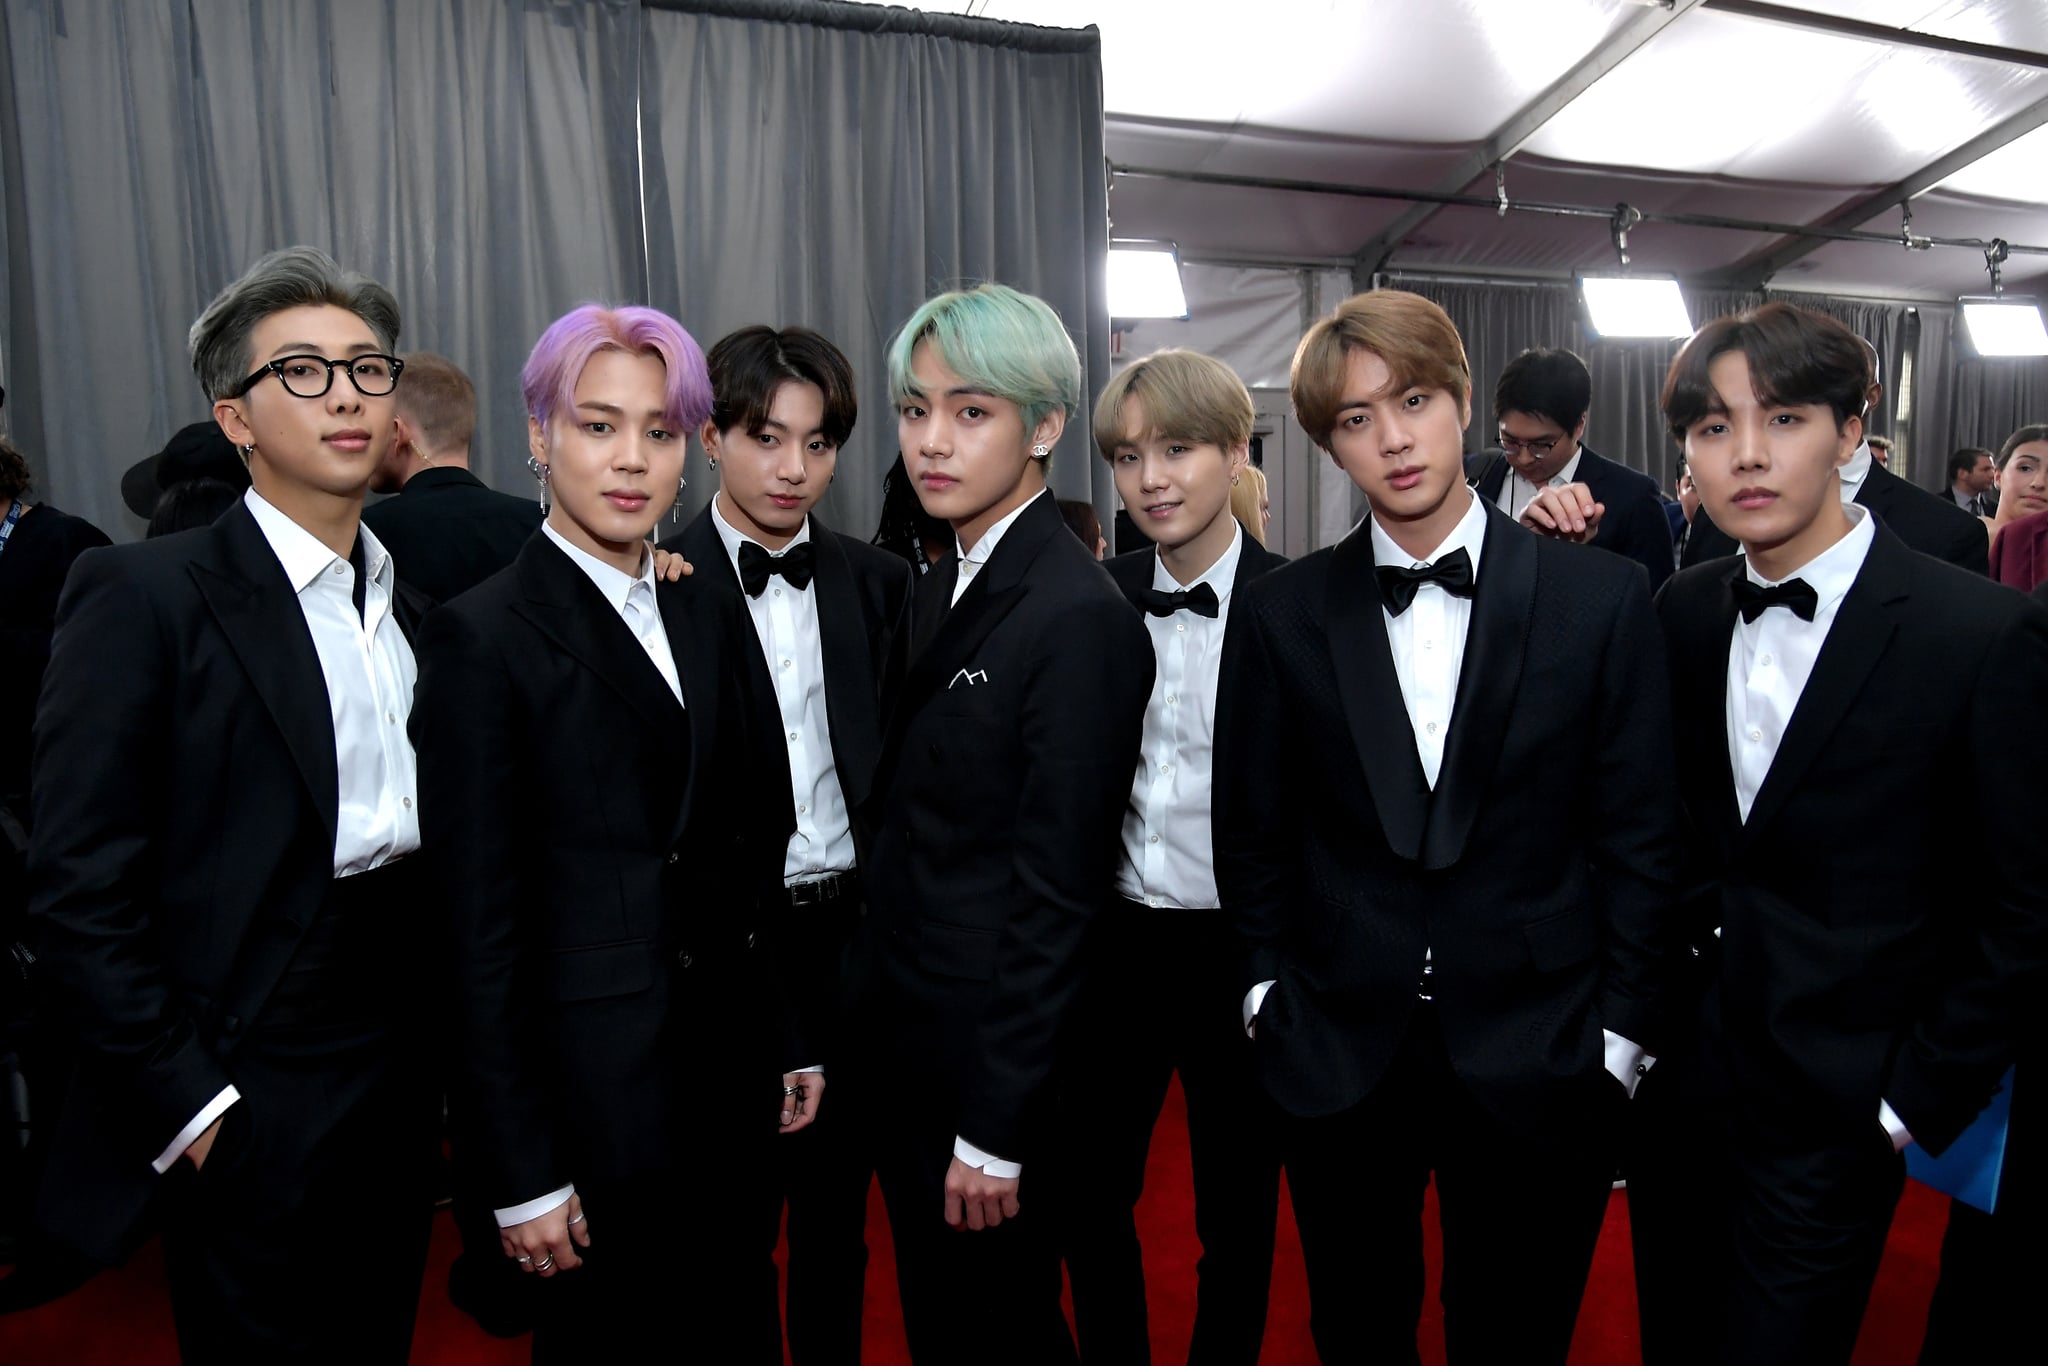 LOS ANGELES, CA - FEBRUARY 10:  BTS attends the 61st Annual GRAMMY Awards at Staples Centre on February 10, 2019 in Los Angeles, California.  (Photo by Neilson Barnard/Getty Images for The Recording Academy)